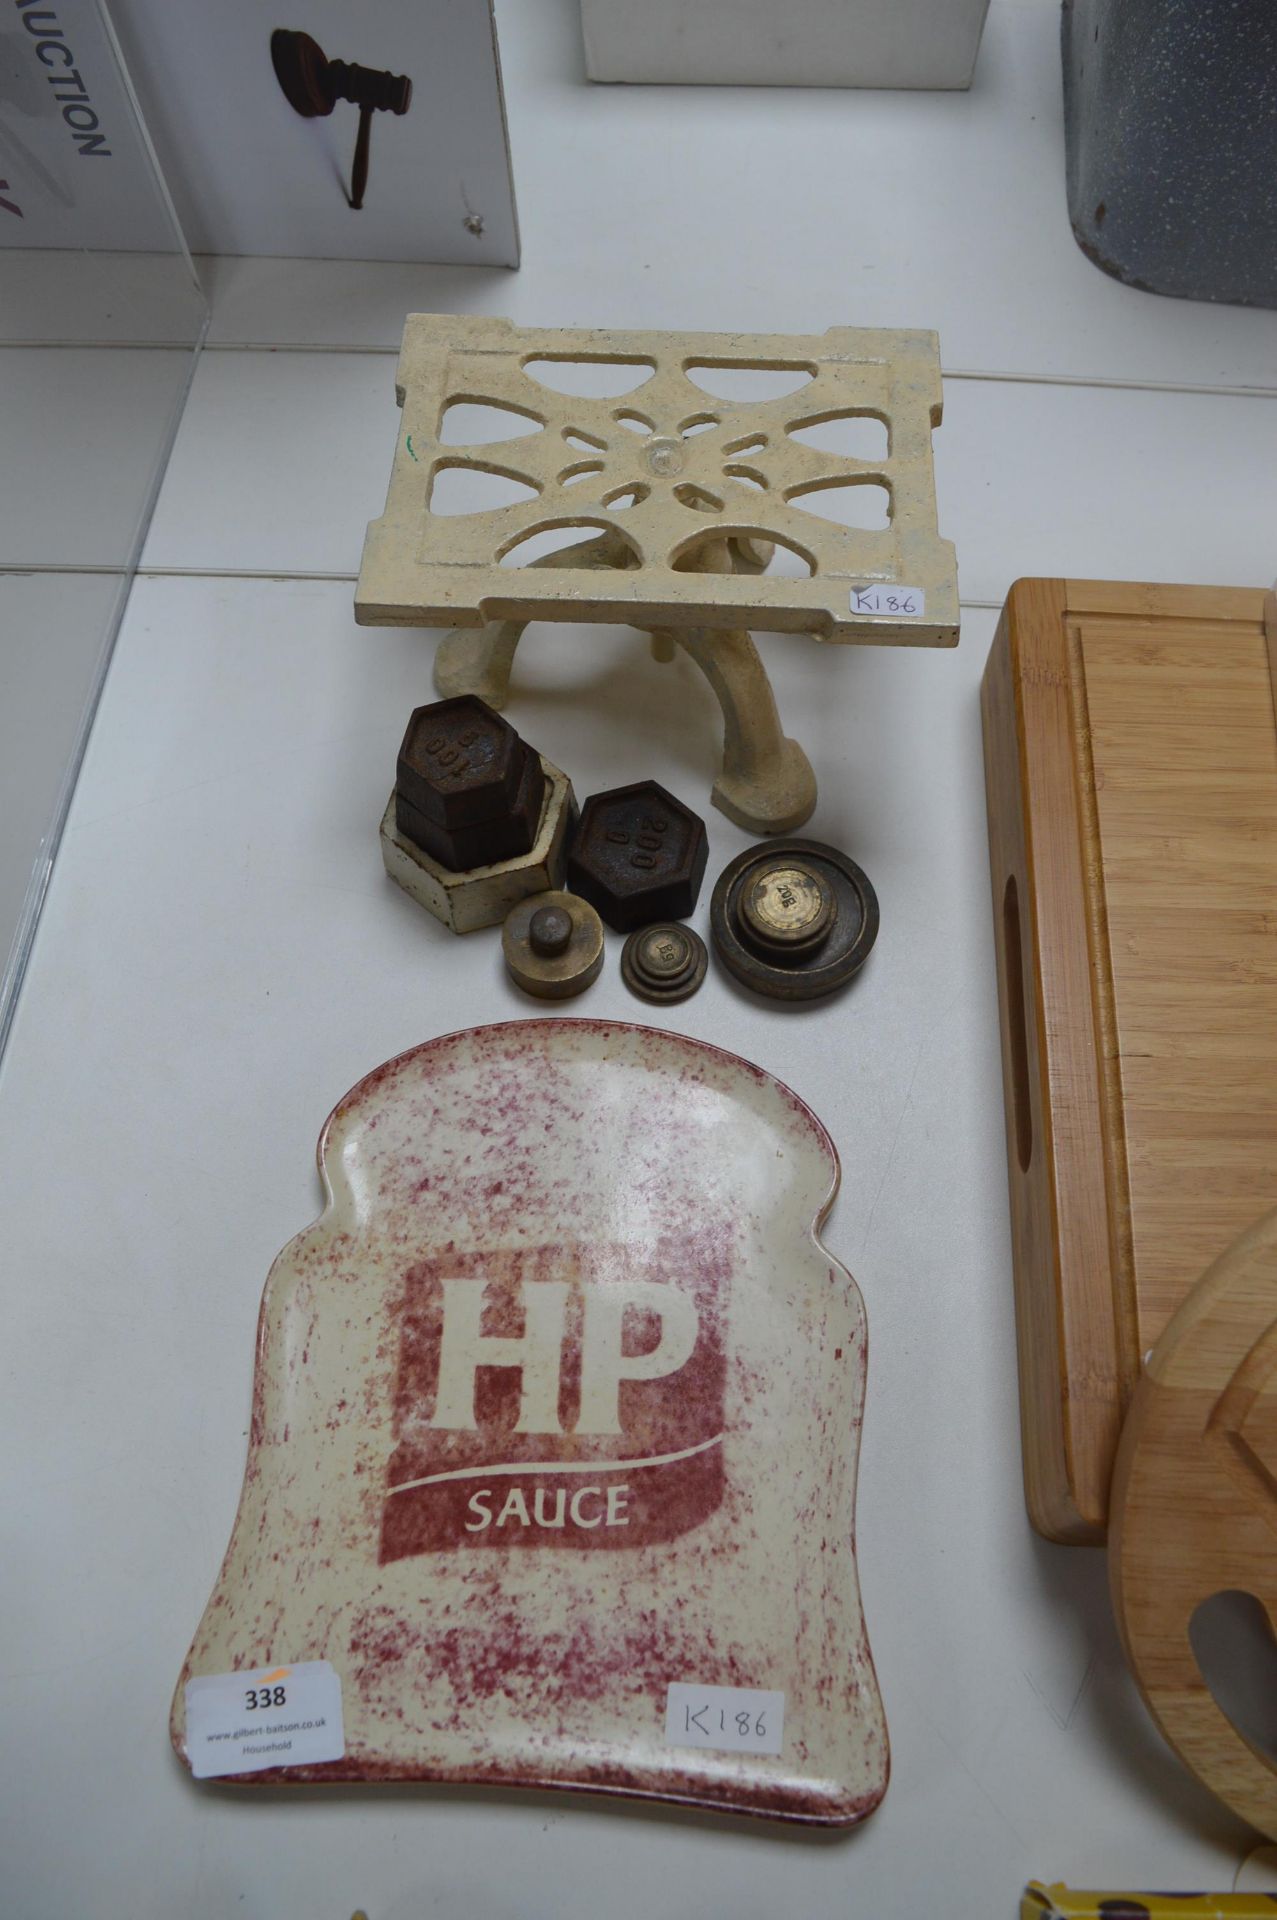 HP Sauce Bread Plate, Trivet and Vintage Weights